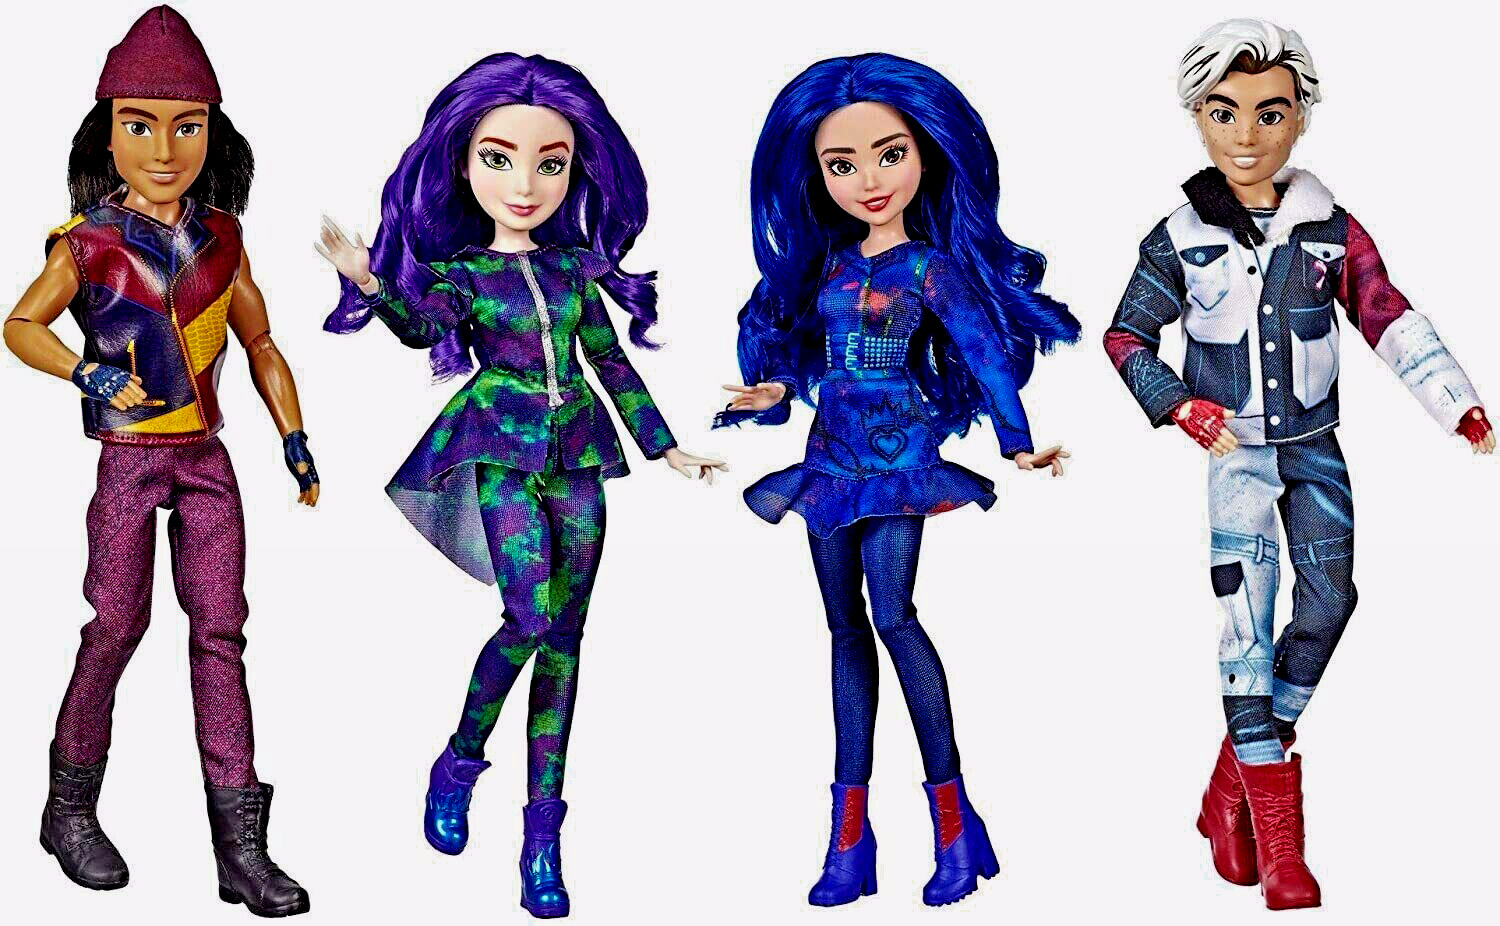 Disney Descendants • Isle of the Lost Doll • 4-Pack • w/Exclusives • Ships Free